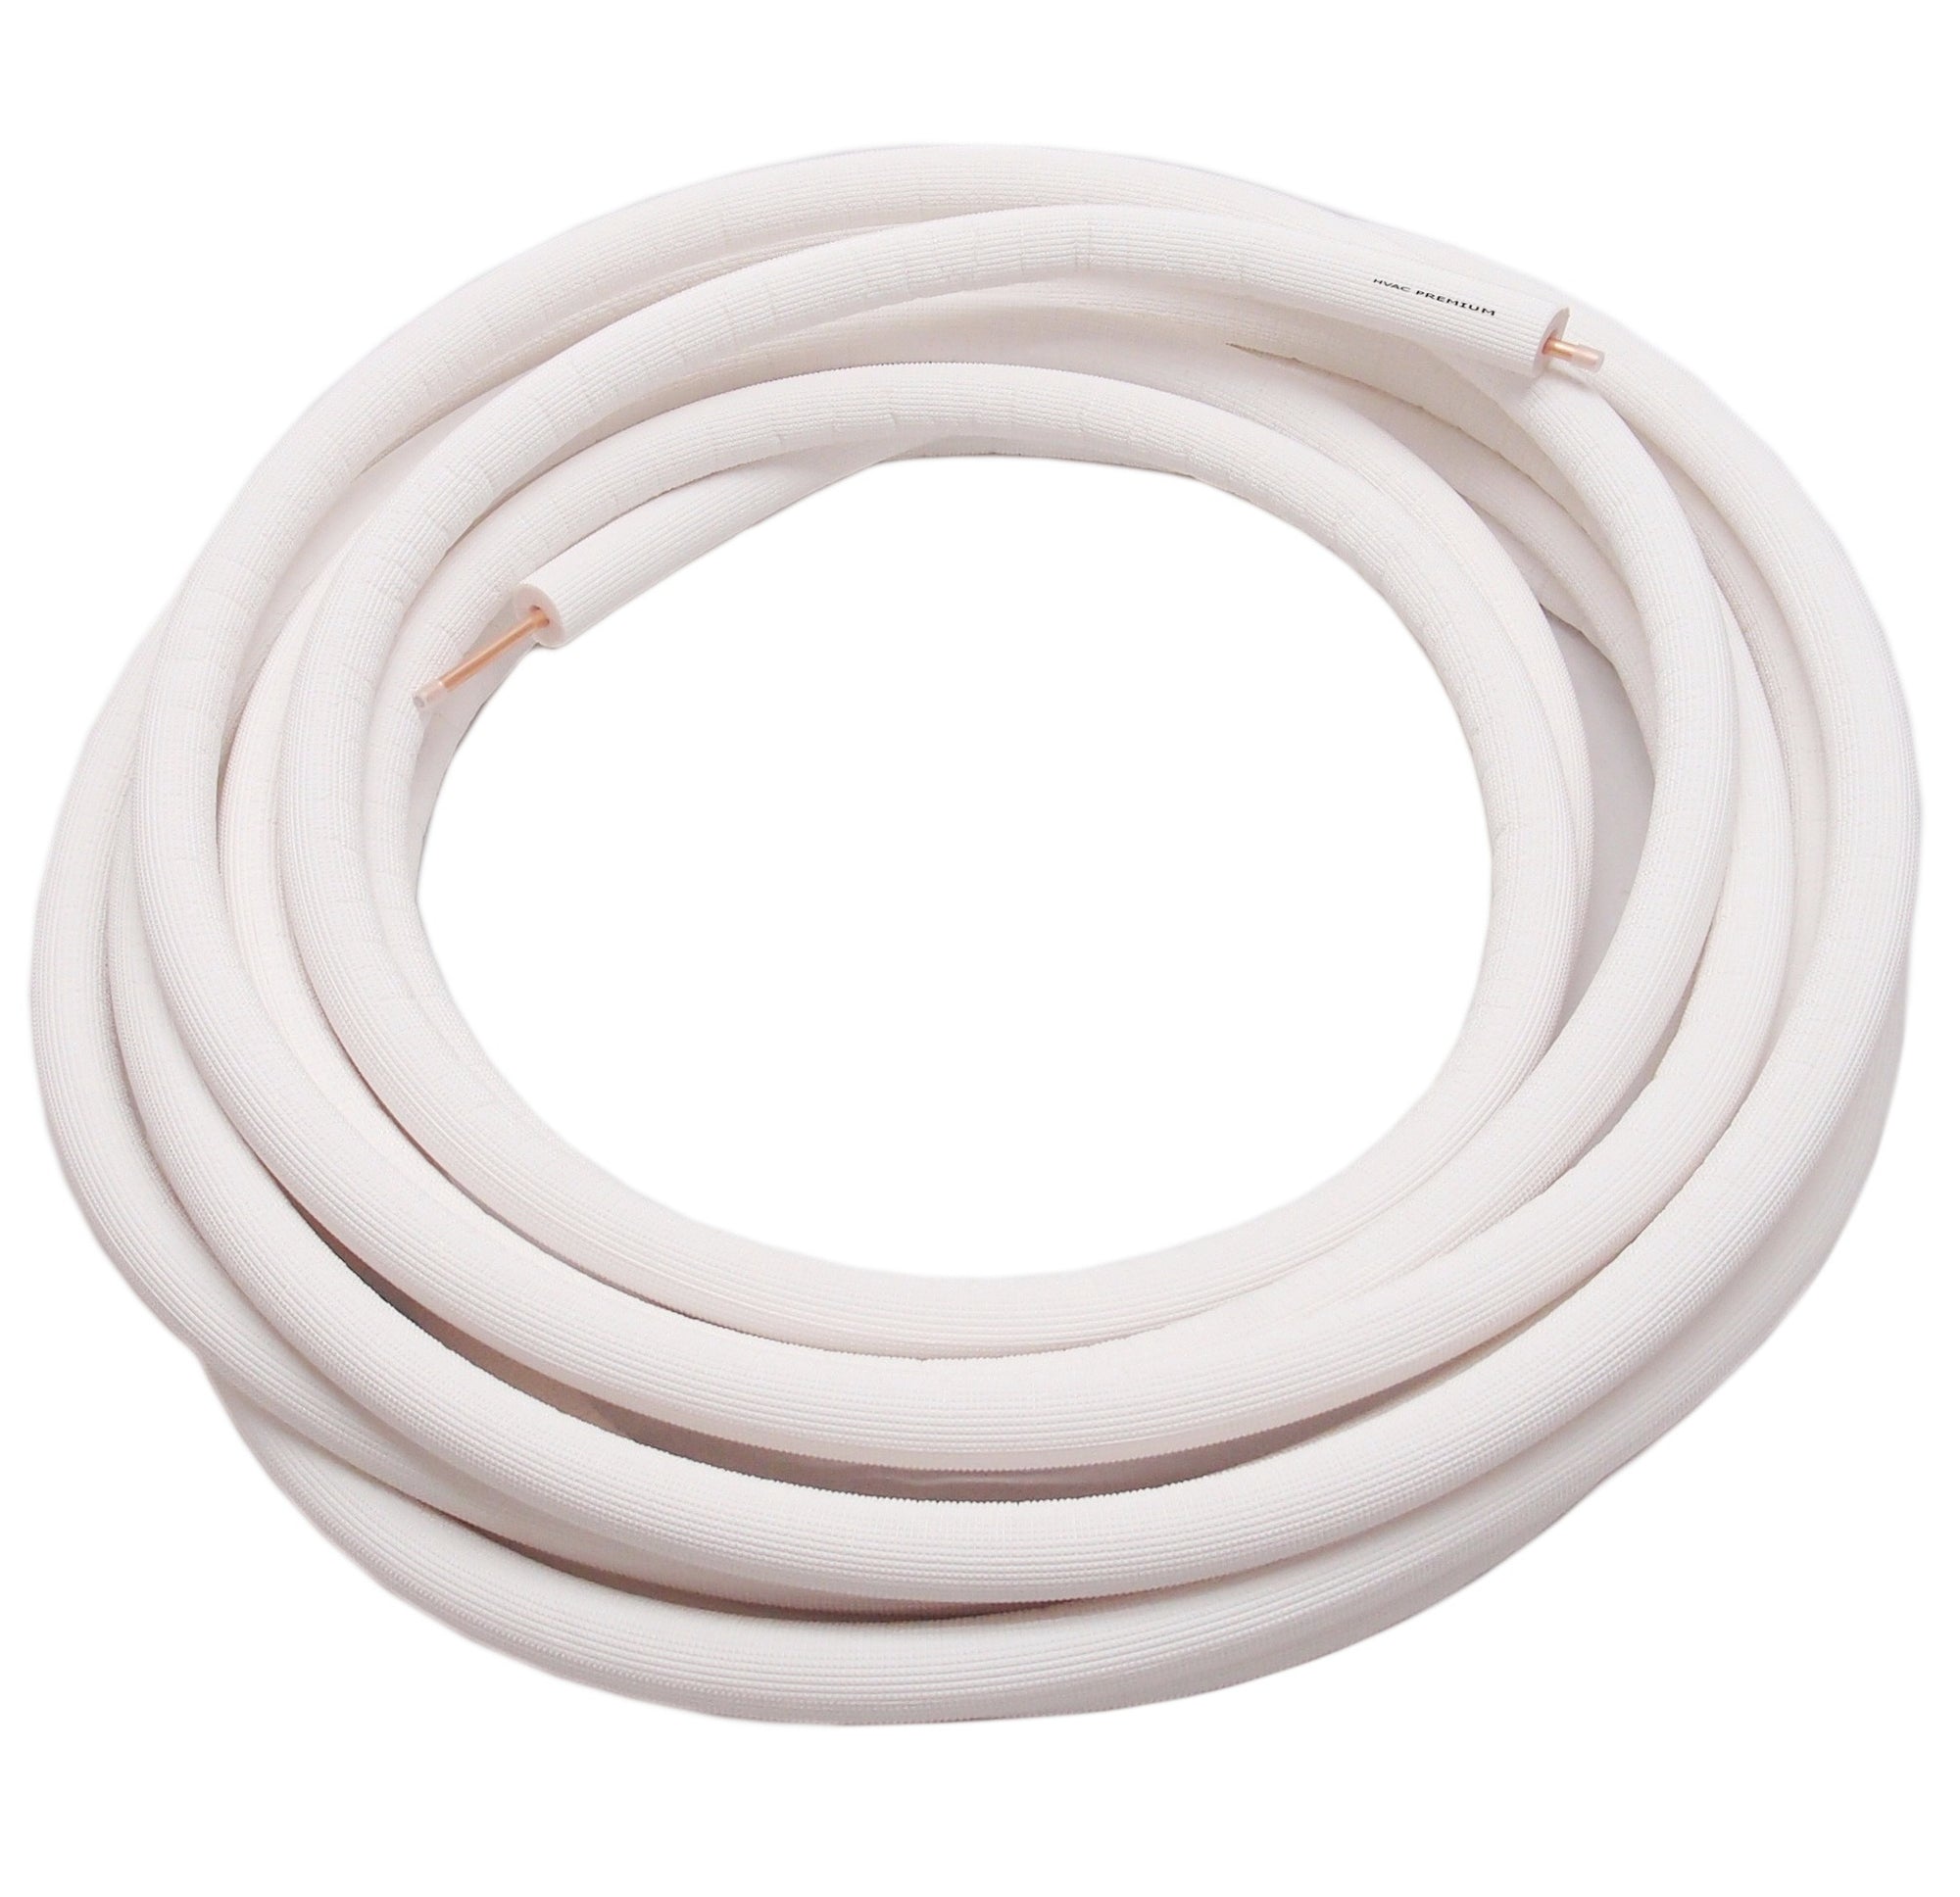 7/8" Insulated Copper Coil Line - Seamless Pipe Tube for HVAC, Refrigerant - 1/2" White Insulation - 25' Long